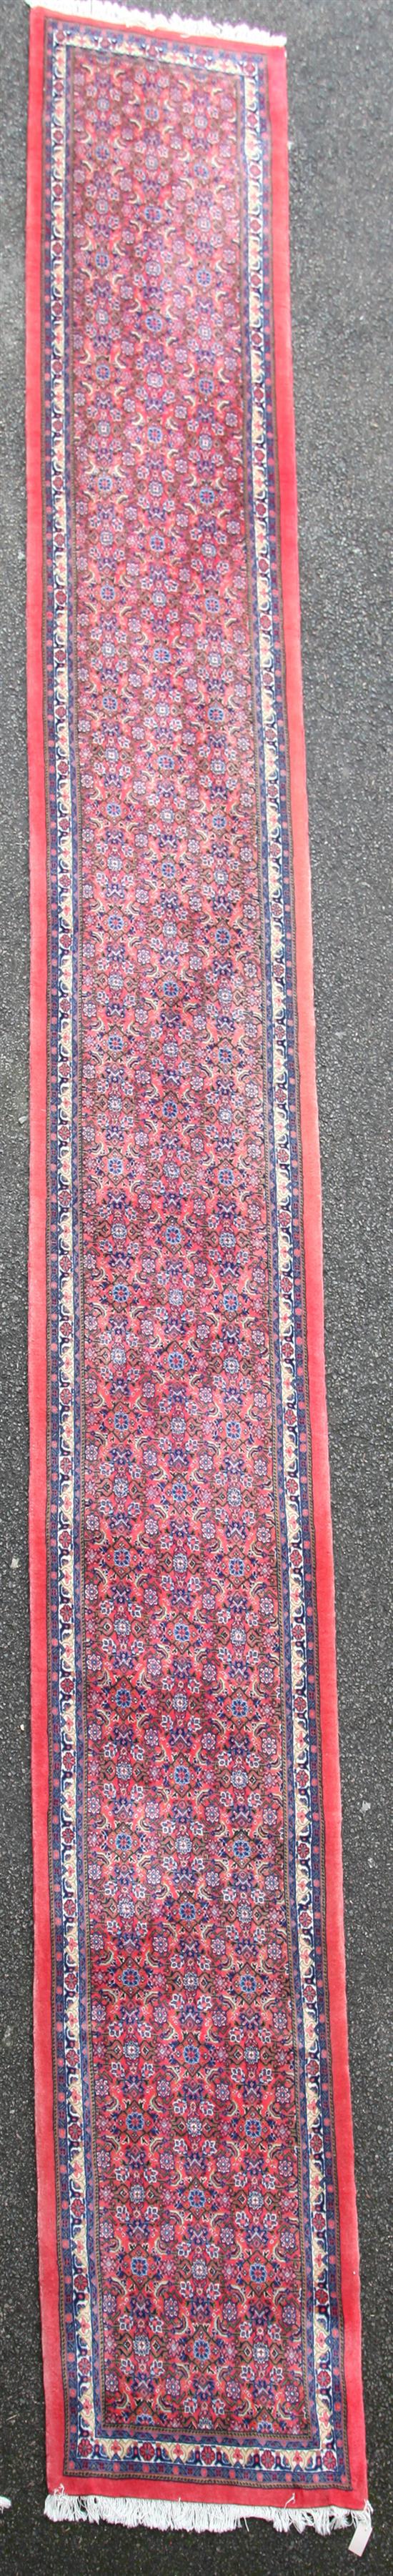 A Persian runner, 21ft 10in. x 2ft 9in.